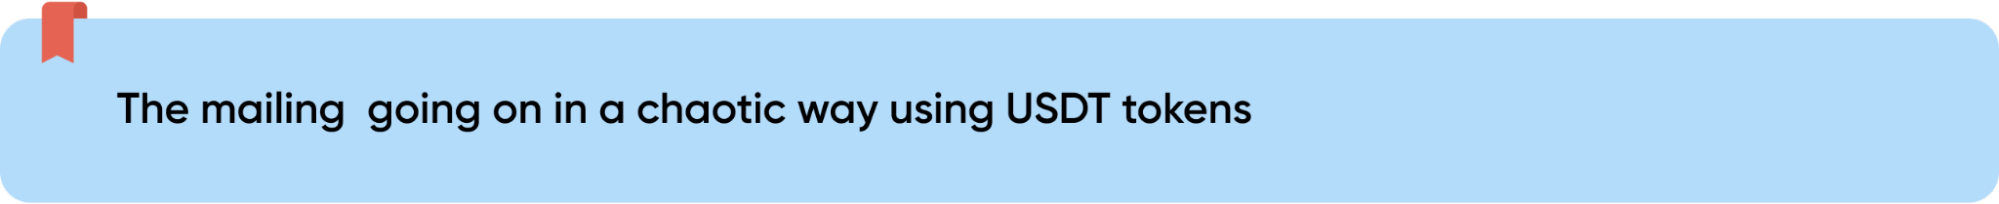 The mailing going on in a chaotic way using USDT tokens